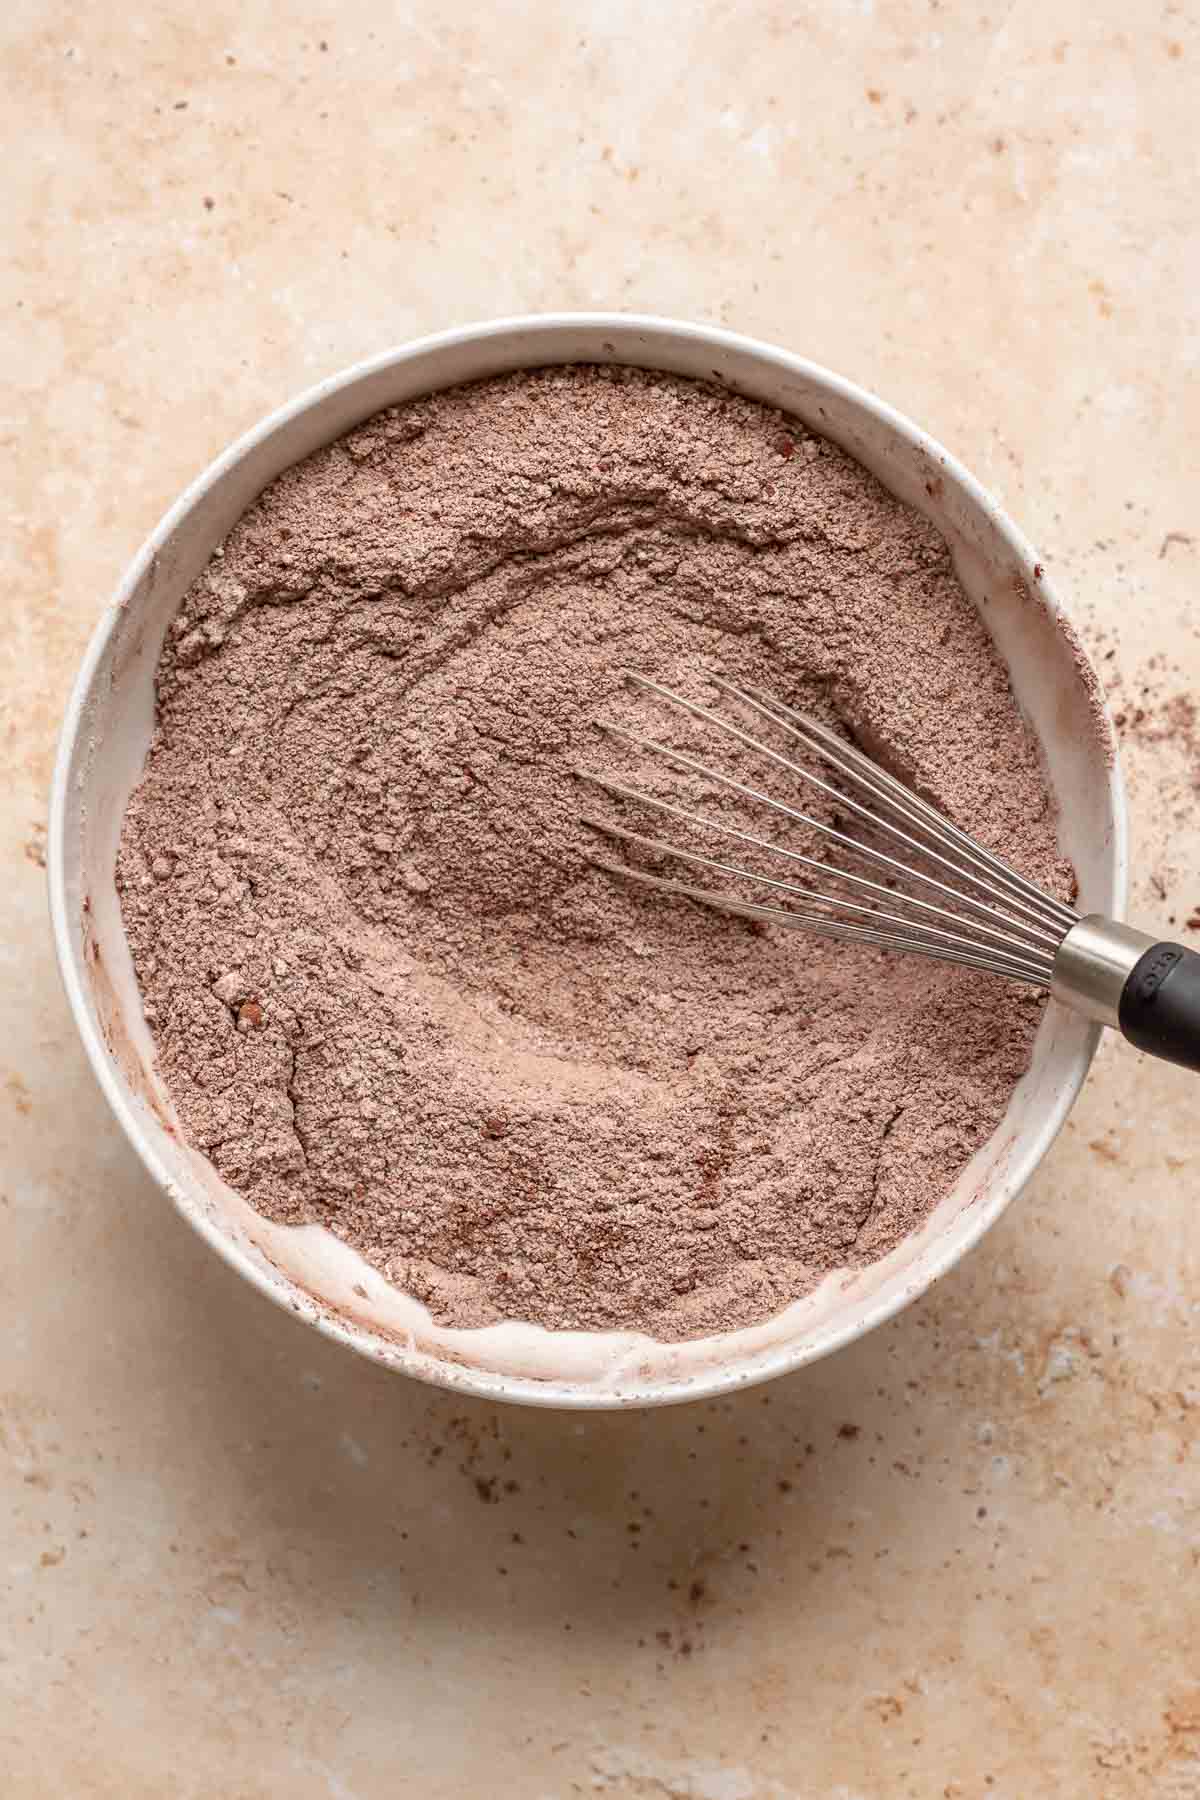 Dry chocolate cake ingredients whisked together in a bowl.